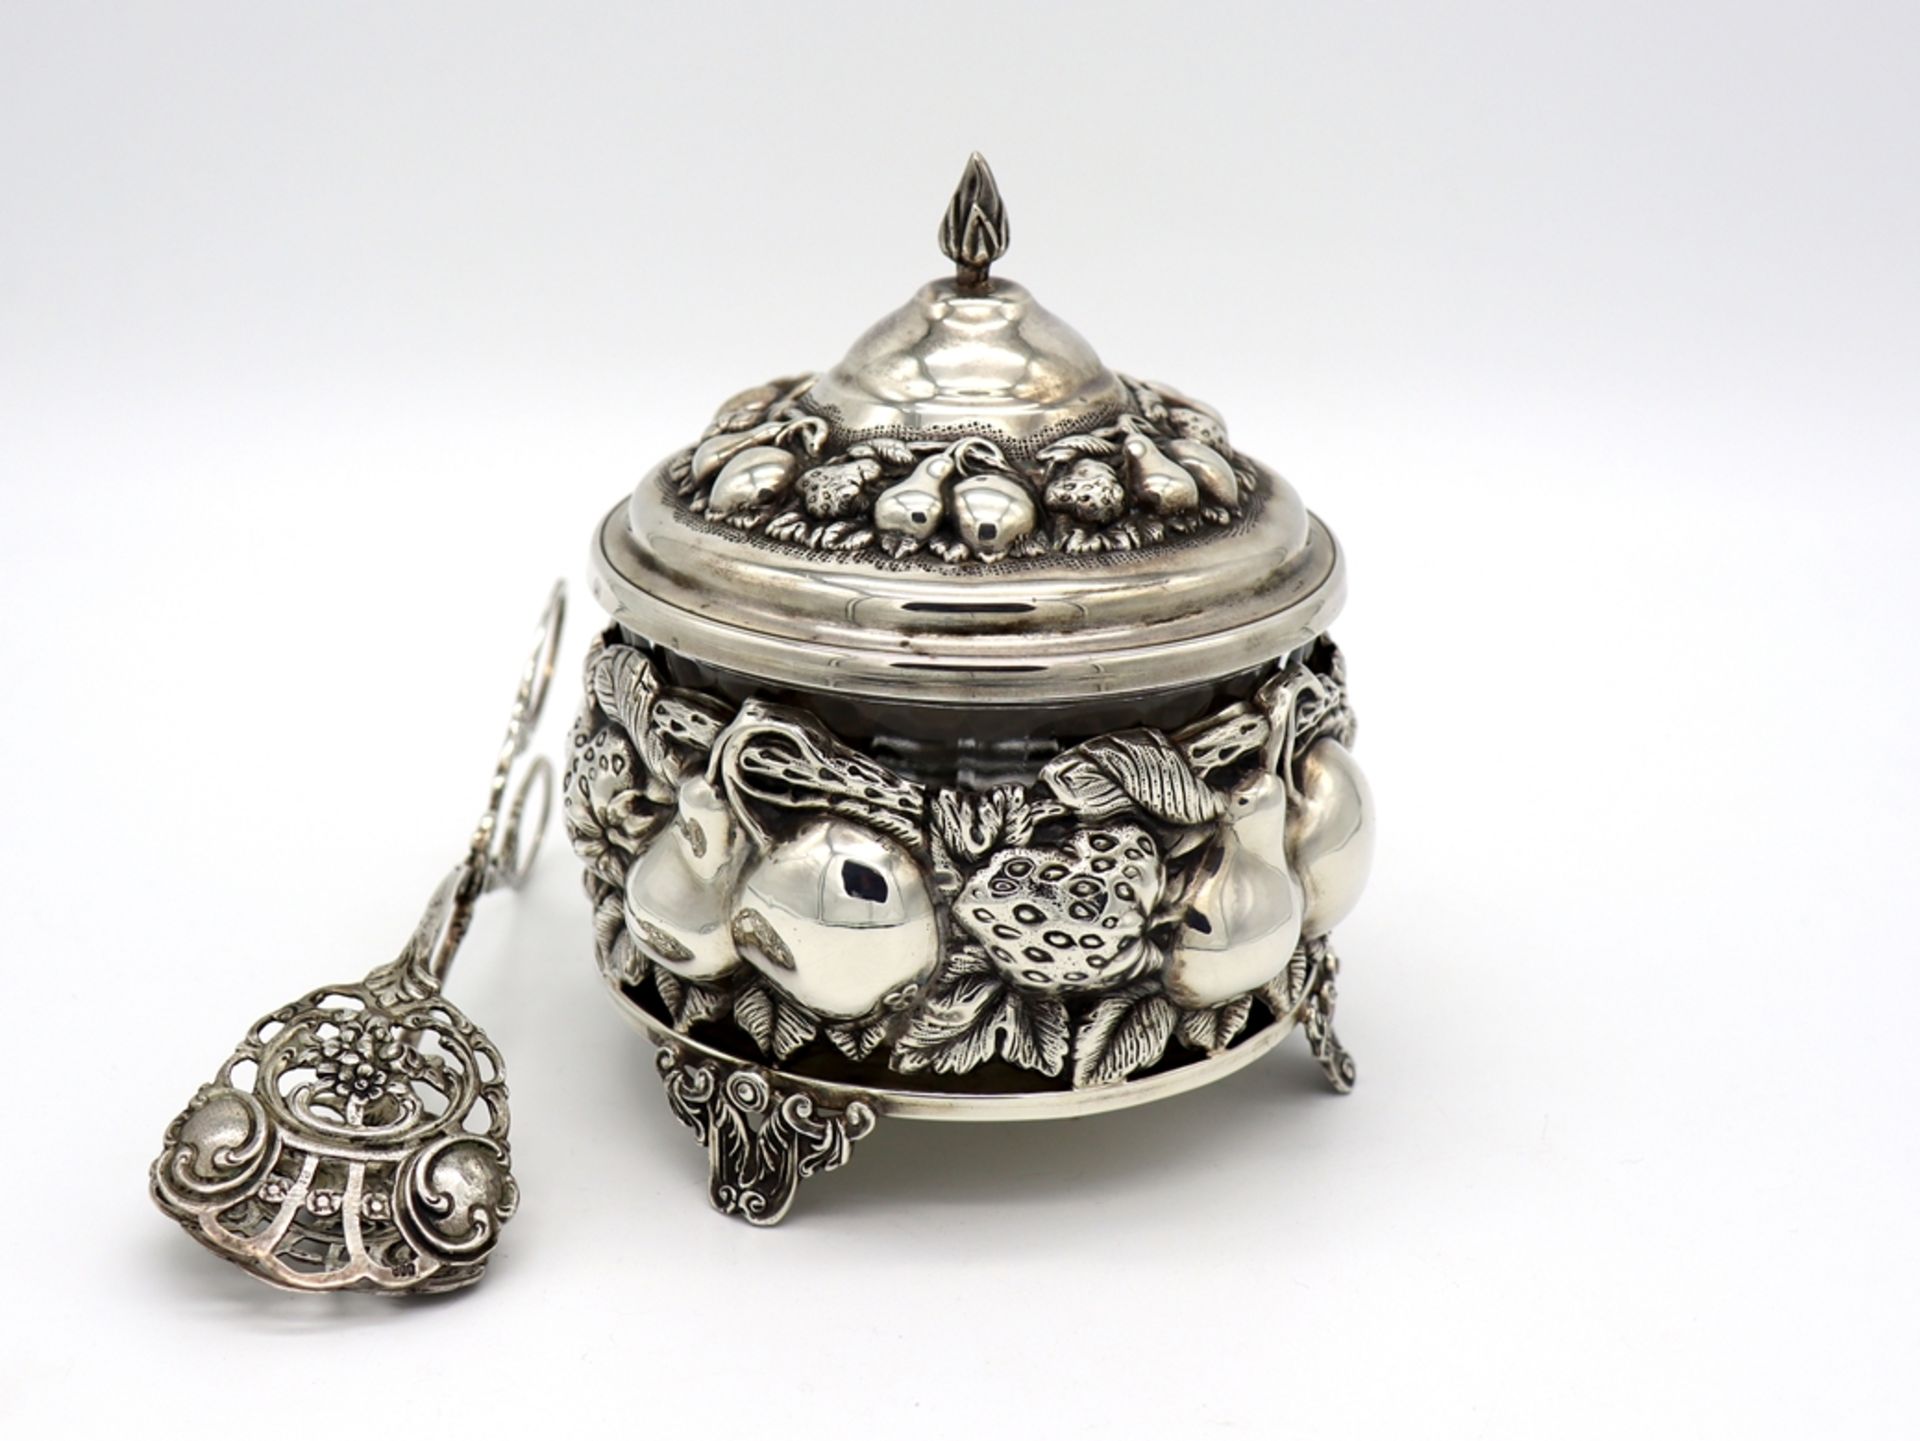 Sugar bowl in fruit decor, sterling silver with glass insert + pastry tongs - Image 11 of 11